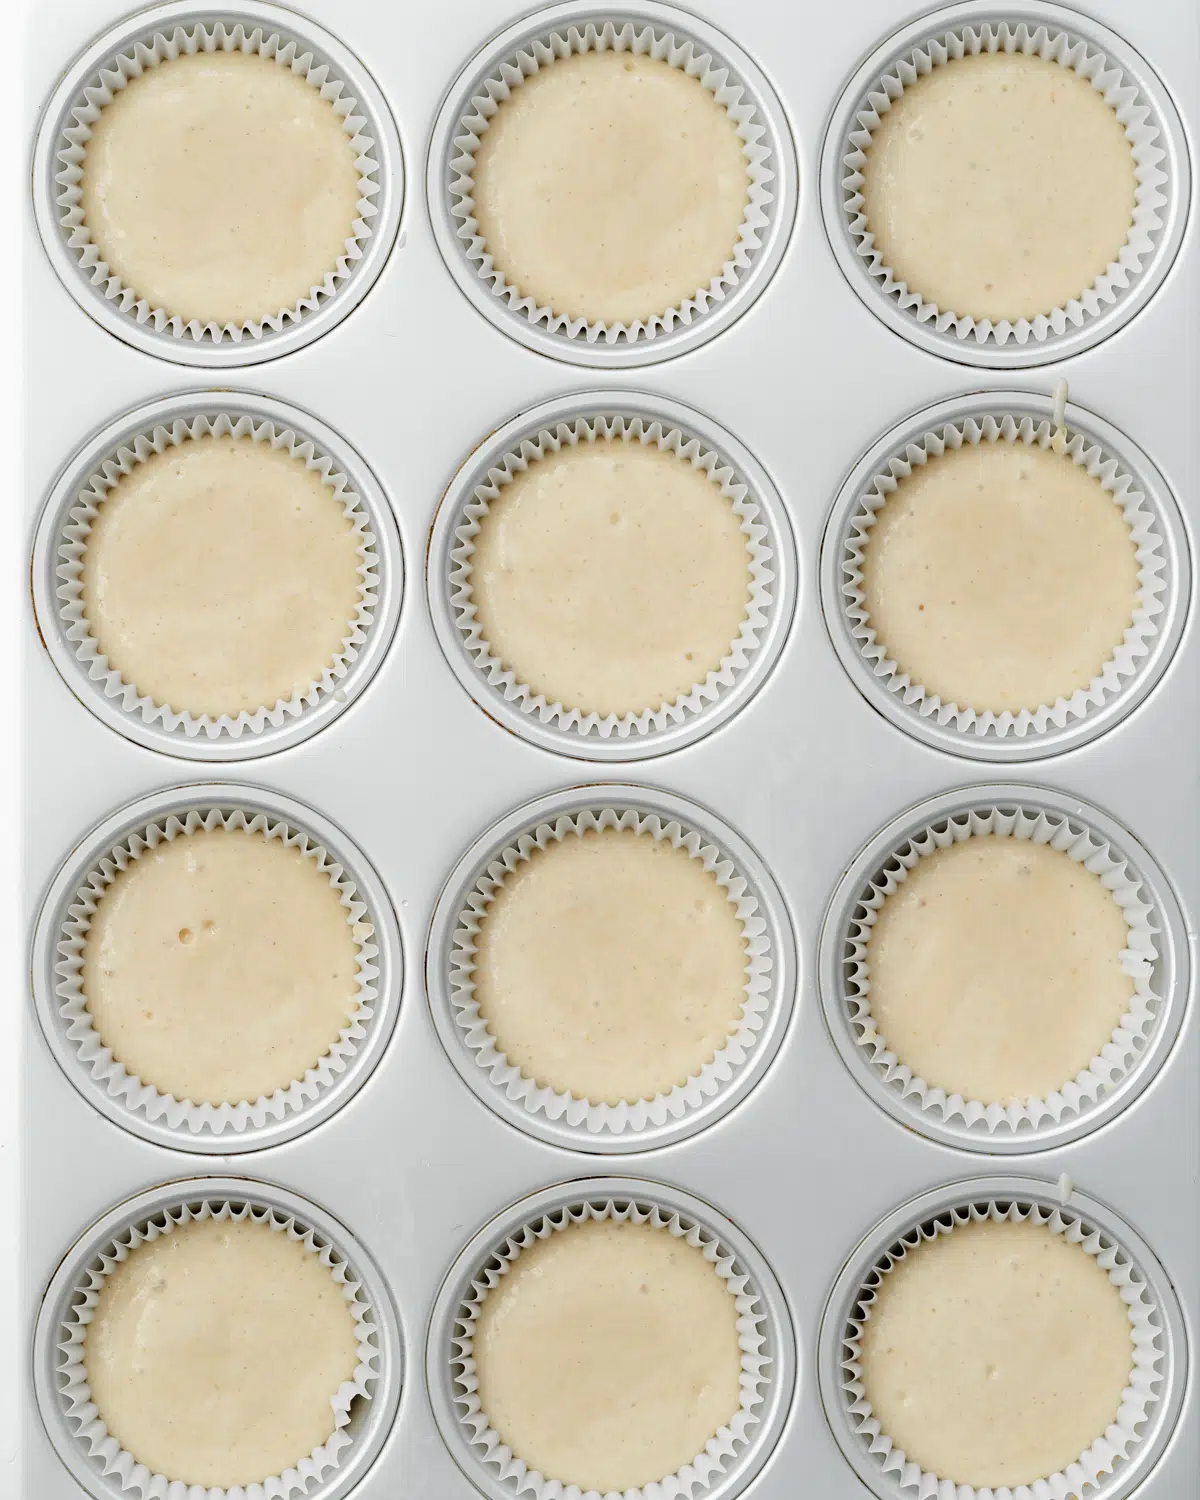 cupcake batter in a lined tray.